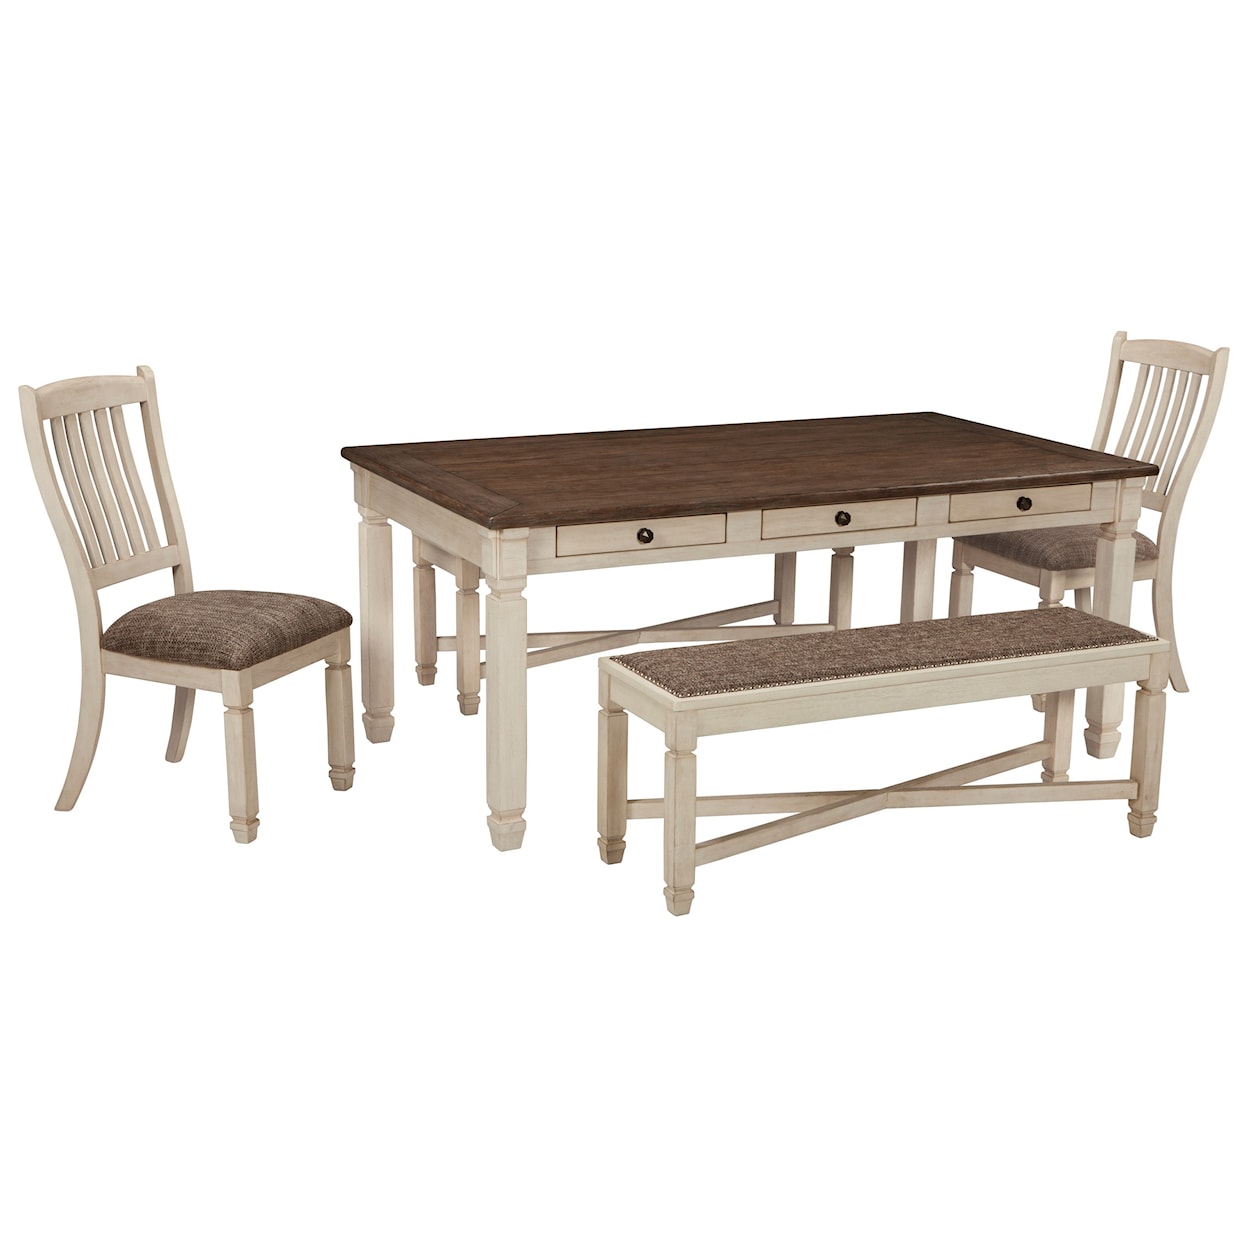 Signature Design by Ashley Bolanburg 5pc Dining Room Group